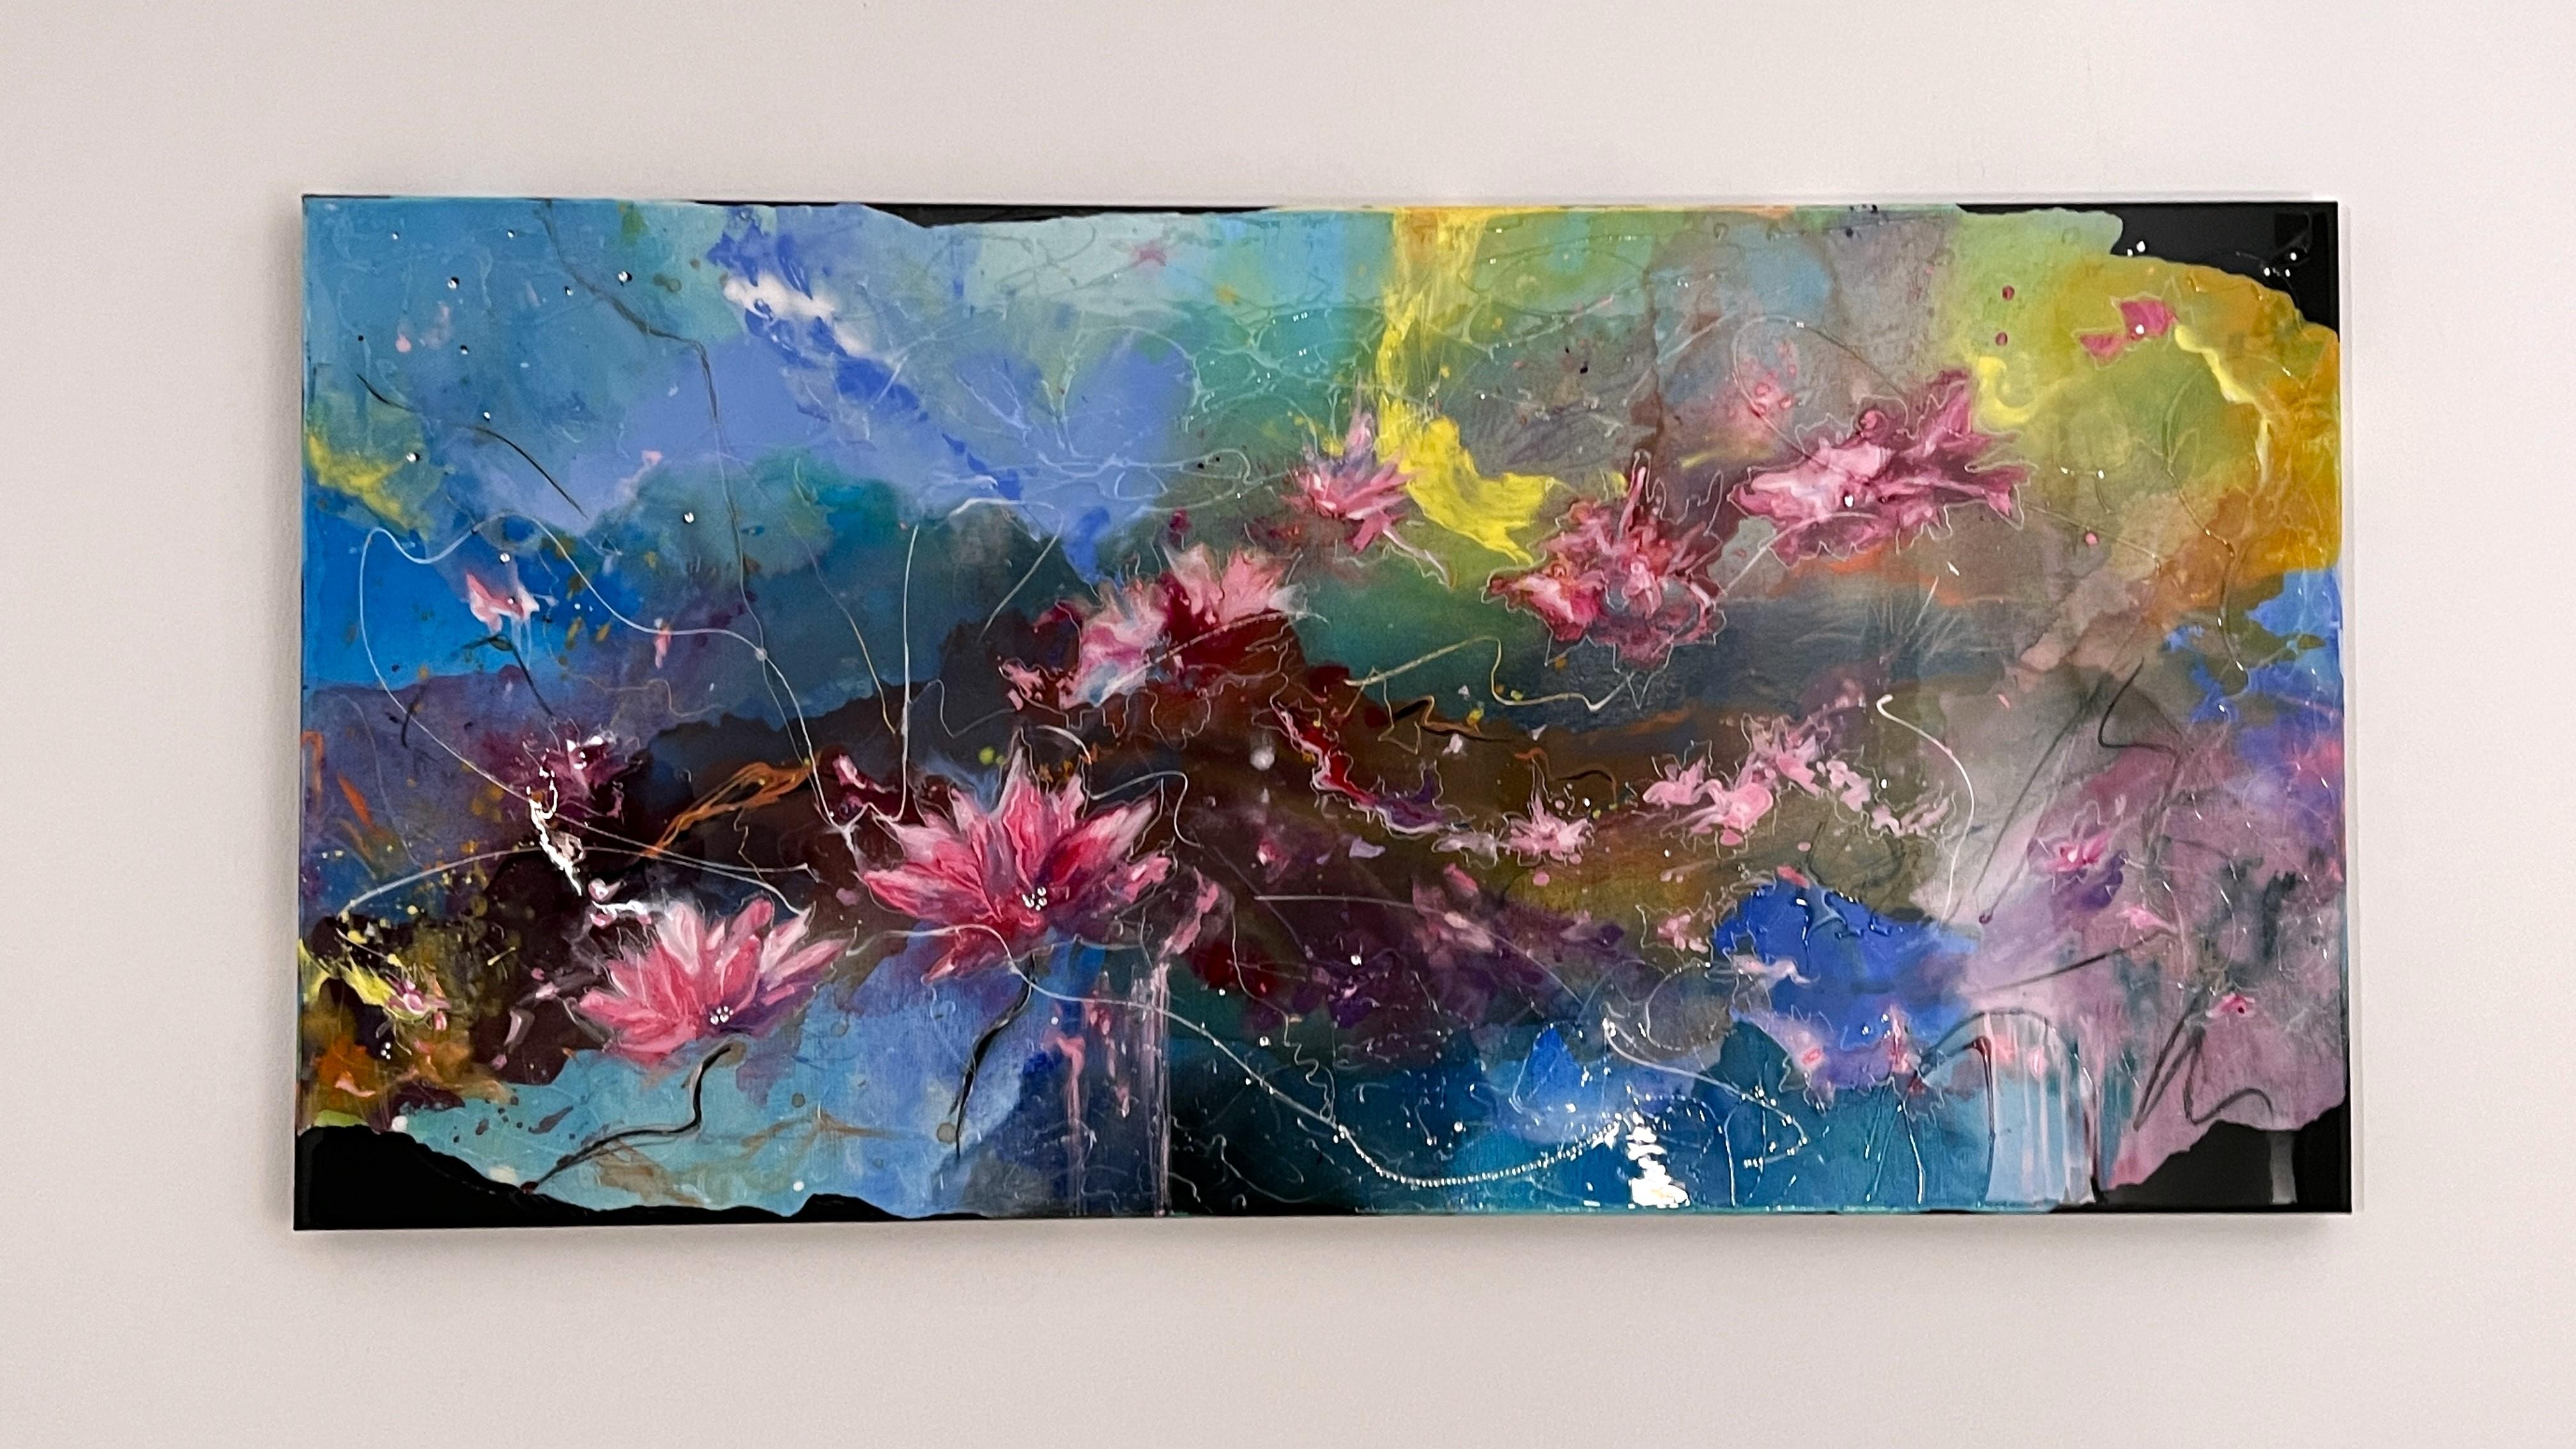 Water lily waltz - Painting by Lana Ritter